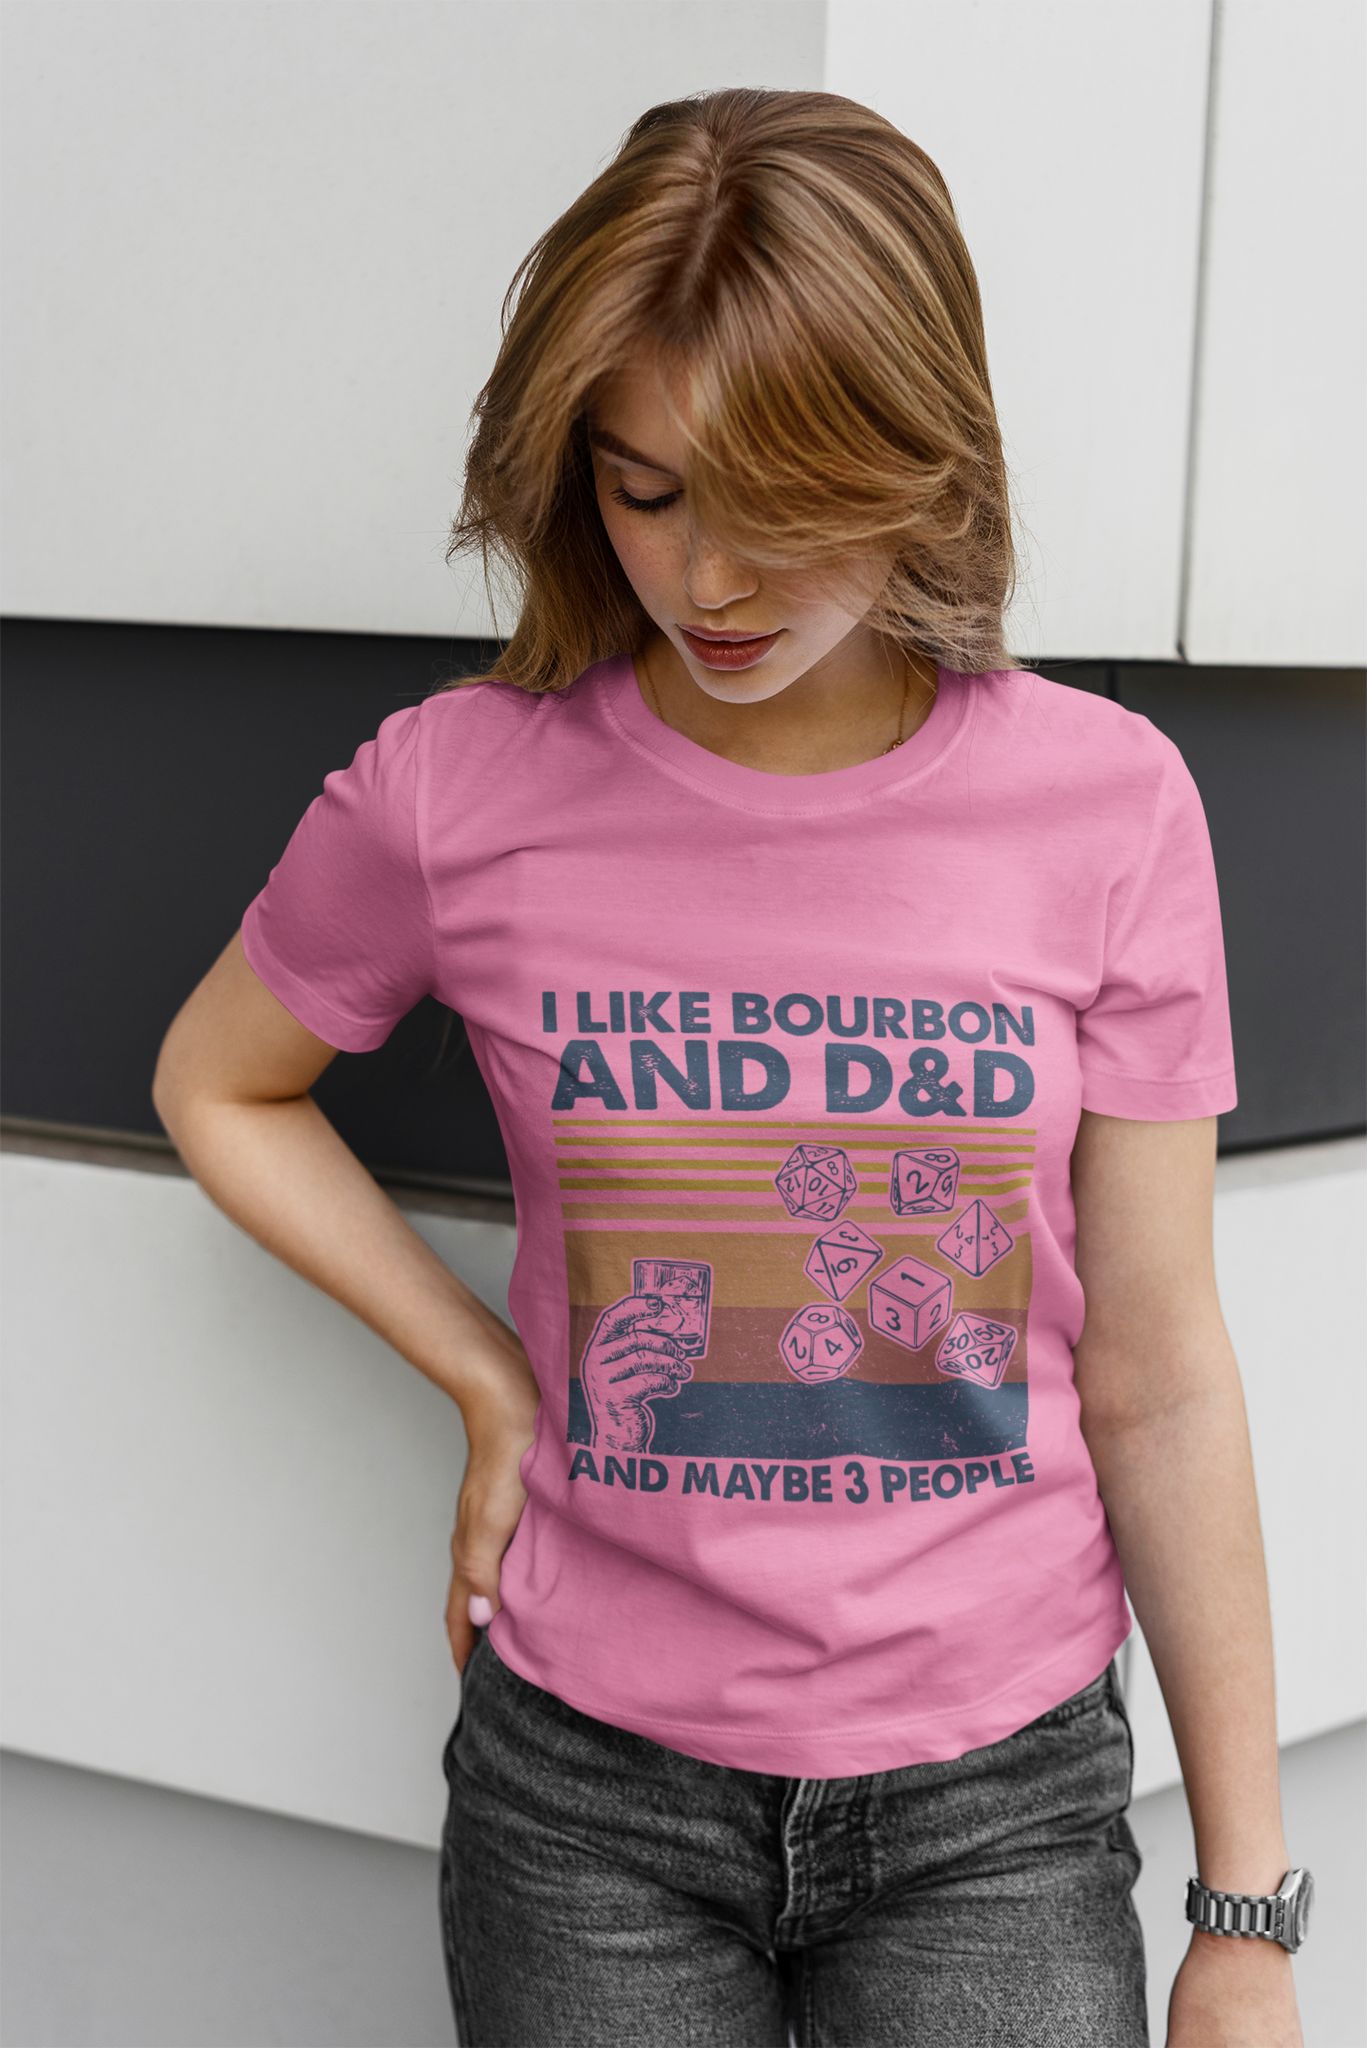 Dungeon And Dragon T Shirt, I Like Bourbon And DND And Maybe 3 People T Shirt, RPG Dice Games Tshirt